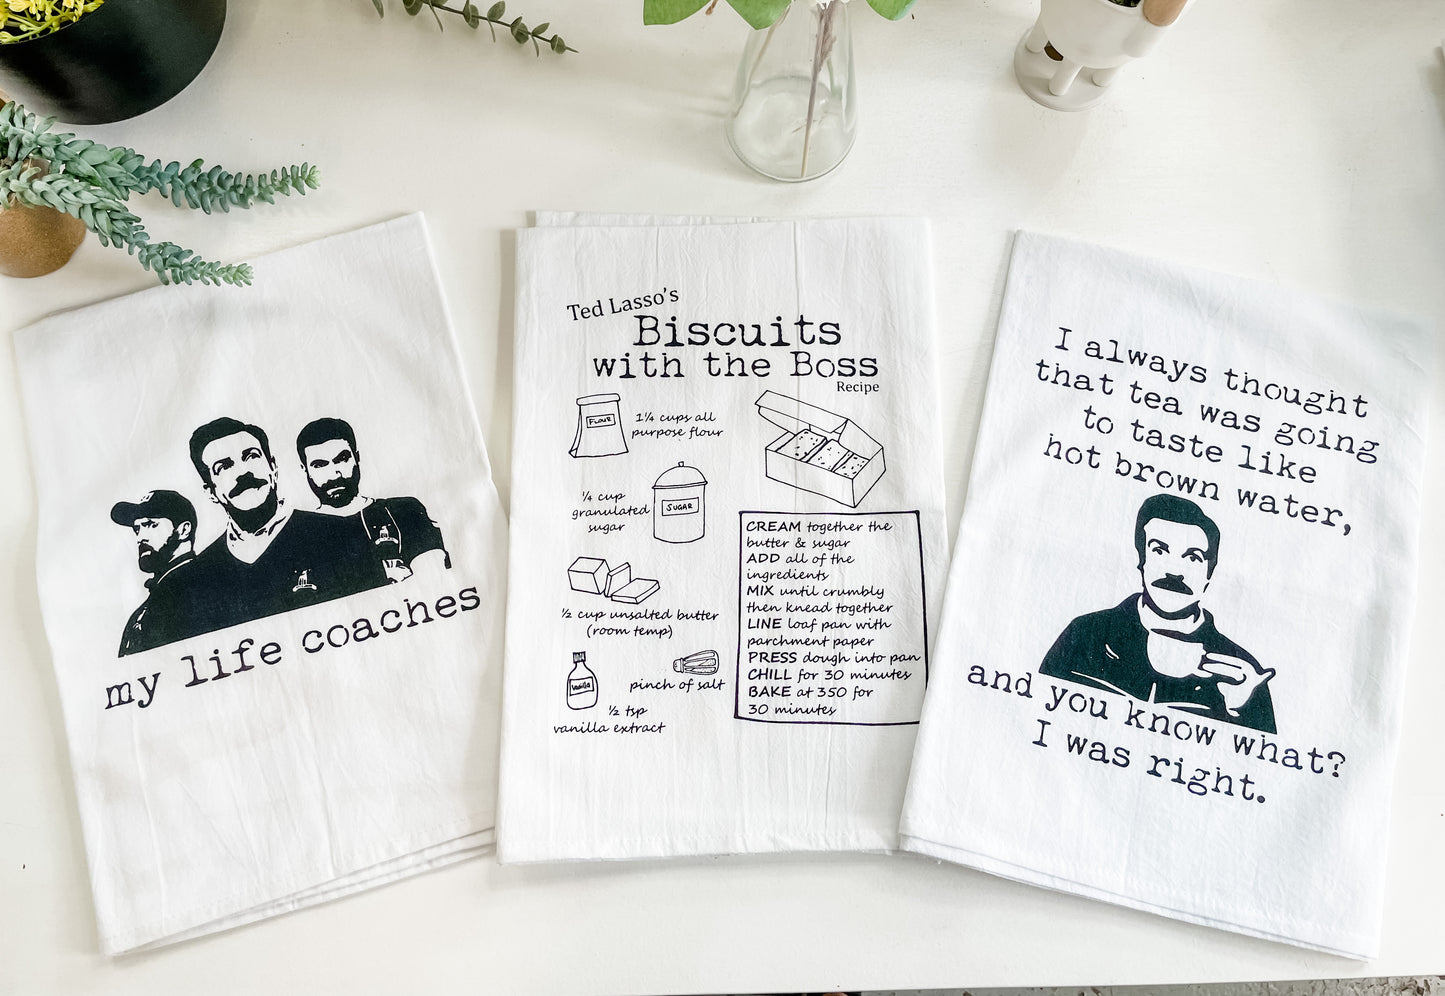 Dish Towel Set of 3 ~ Life Coaches, Biscuits, Hot Brown Water ~ White (Ted Lasso) - MoonlightMakers